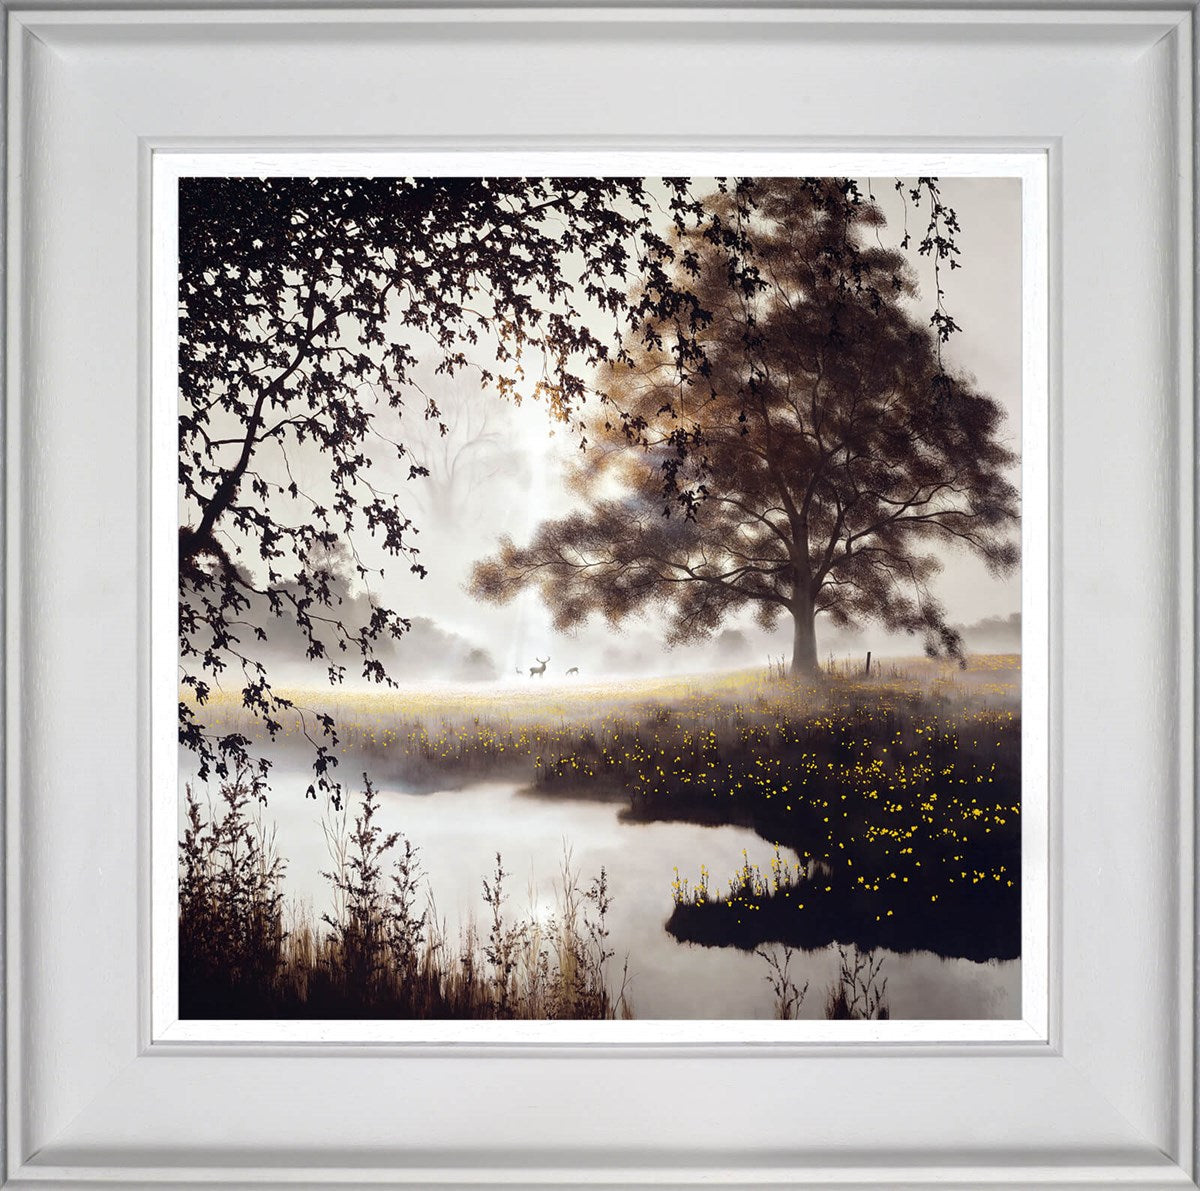 Roaming Free limited edition framed print by John Waterhouse